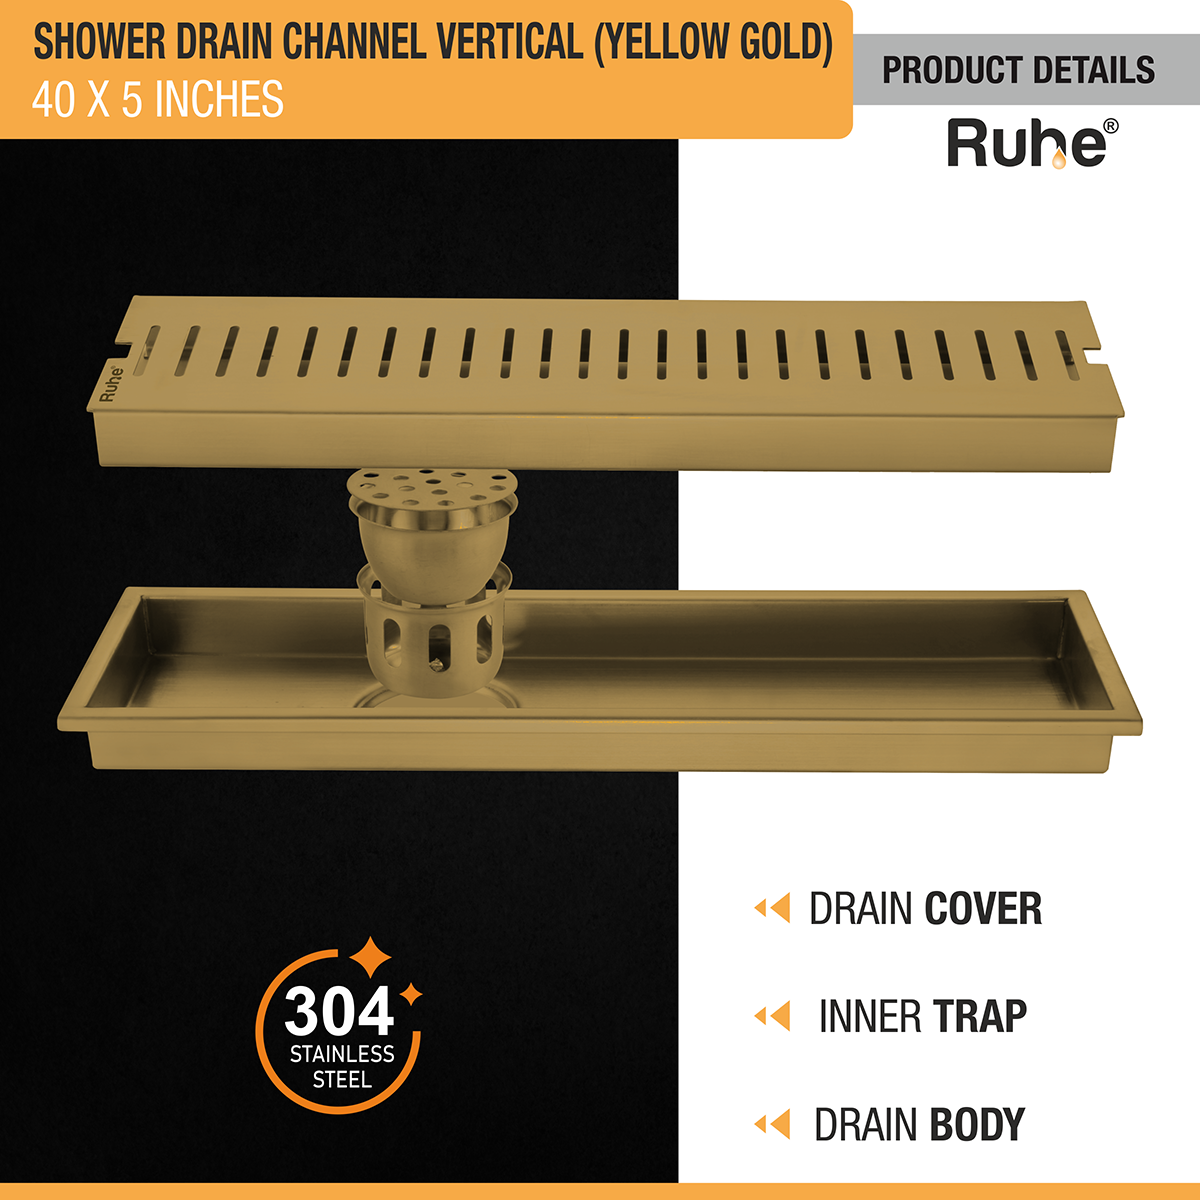 Vertical Shower Drain Channel (40 x 5 Inches) YELLOW GOLD product details